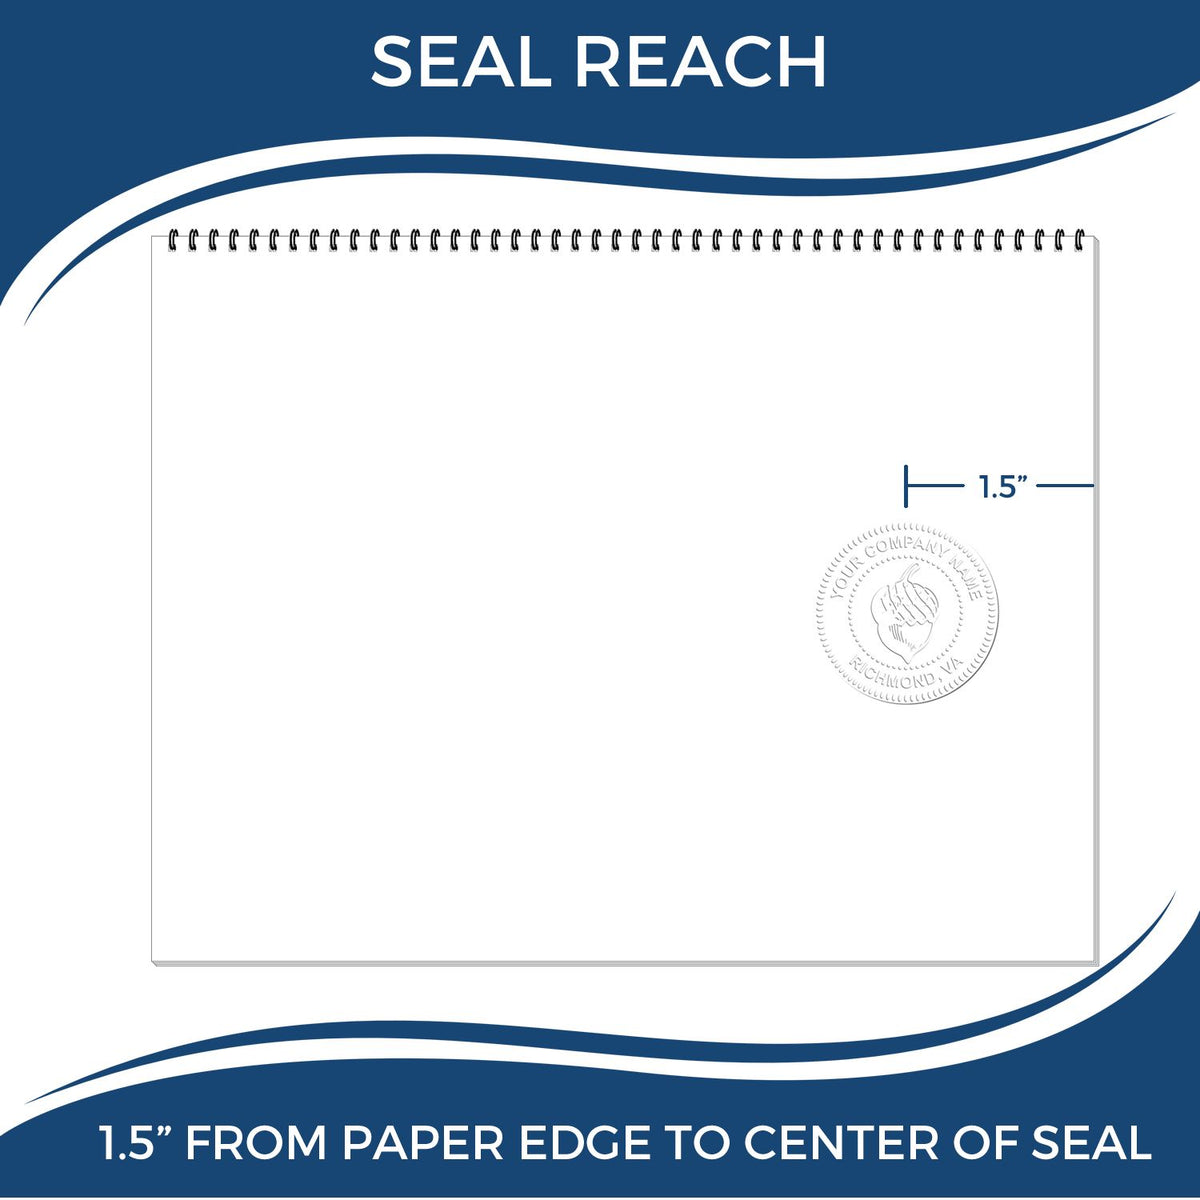 An infographic showing the seal reach which is represented by a ruler and a miniature seal image of the Handheld Connecticut Land Surveyor Seal